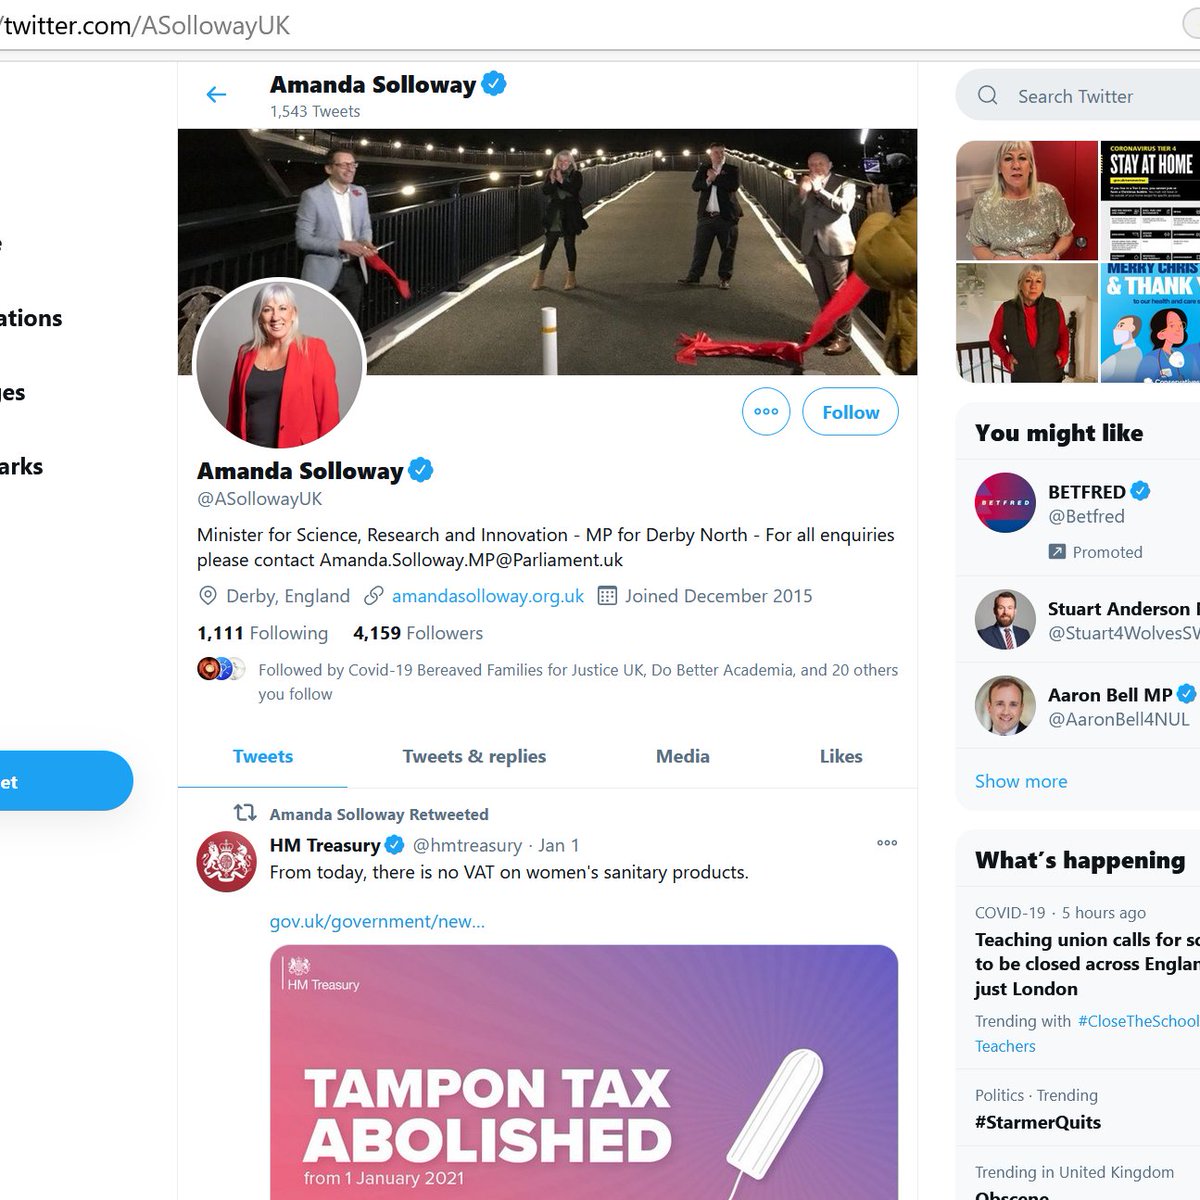 Anna Solloway, MP for Derby North, shares the Treasury tweet. She doesn't mention voting against the 2015 motion to abolish the tampon tax. Did she forget? Or does she want you to forget?